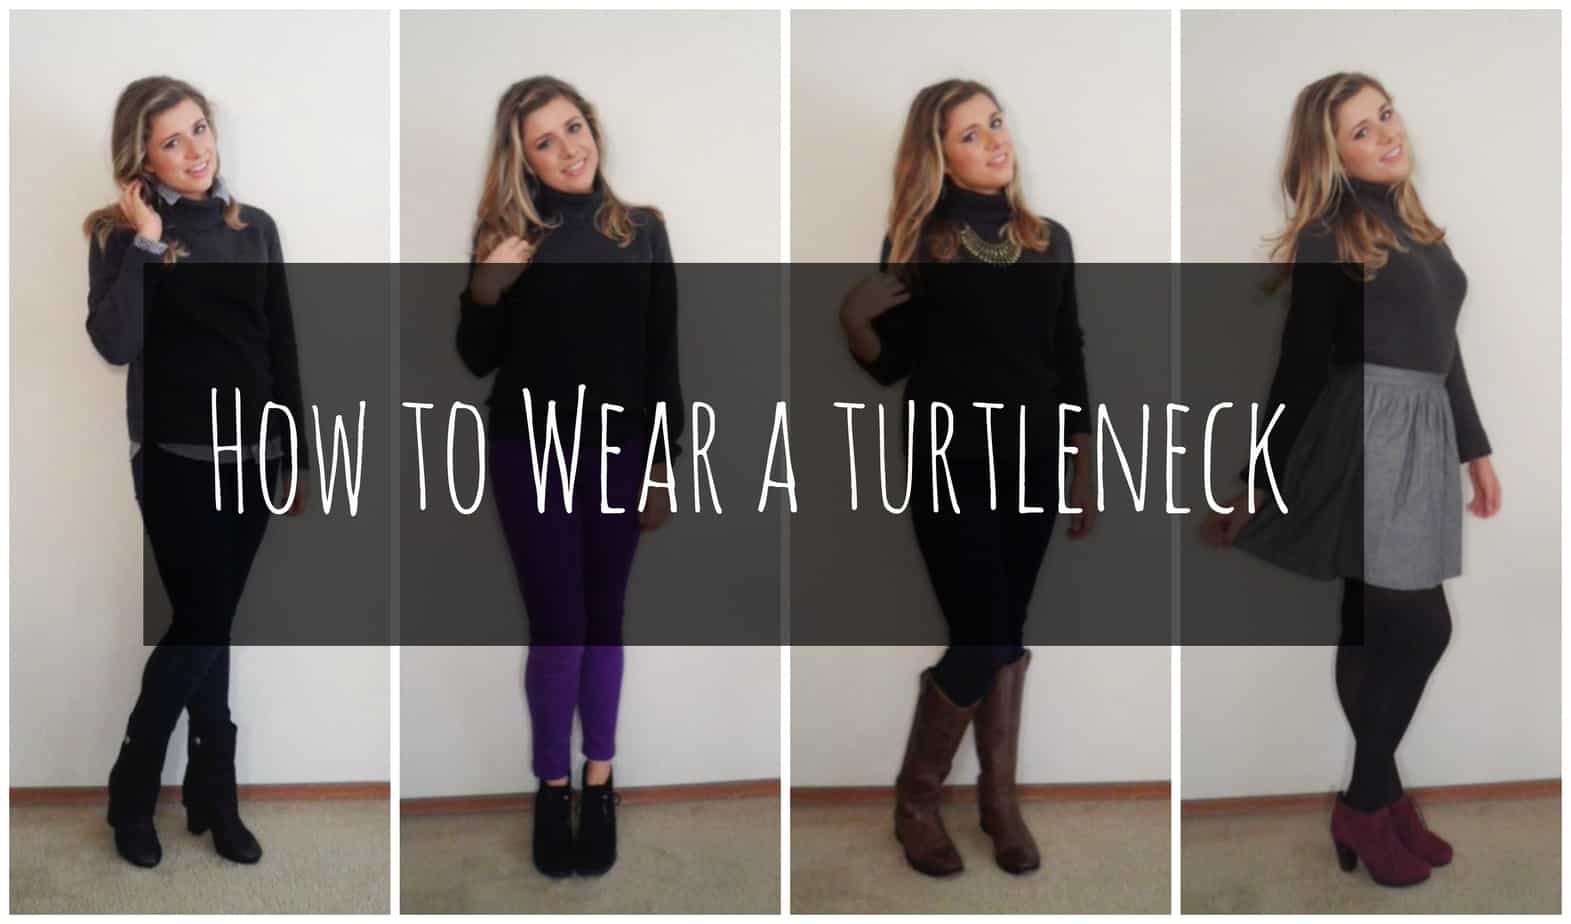 How to Wear a Turtleneck